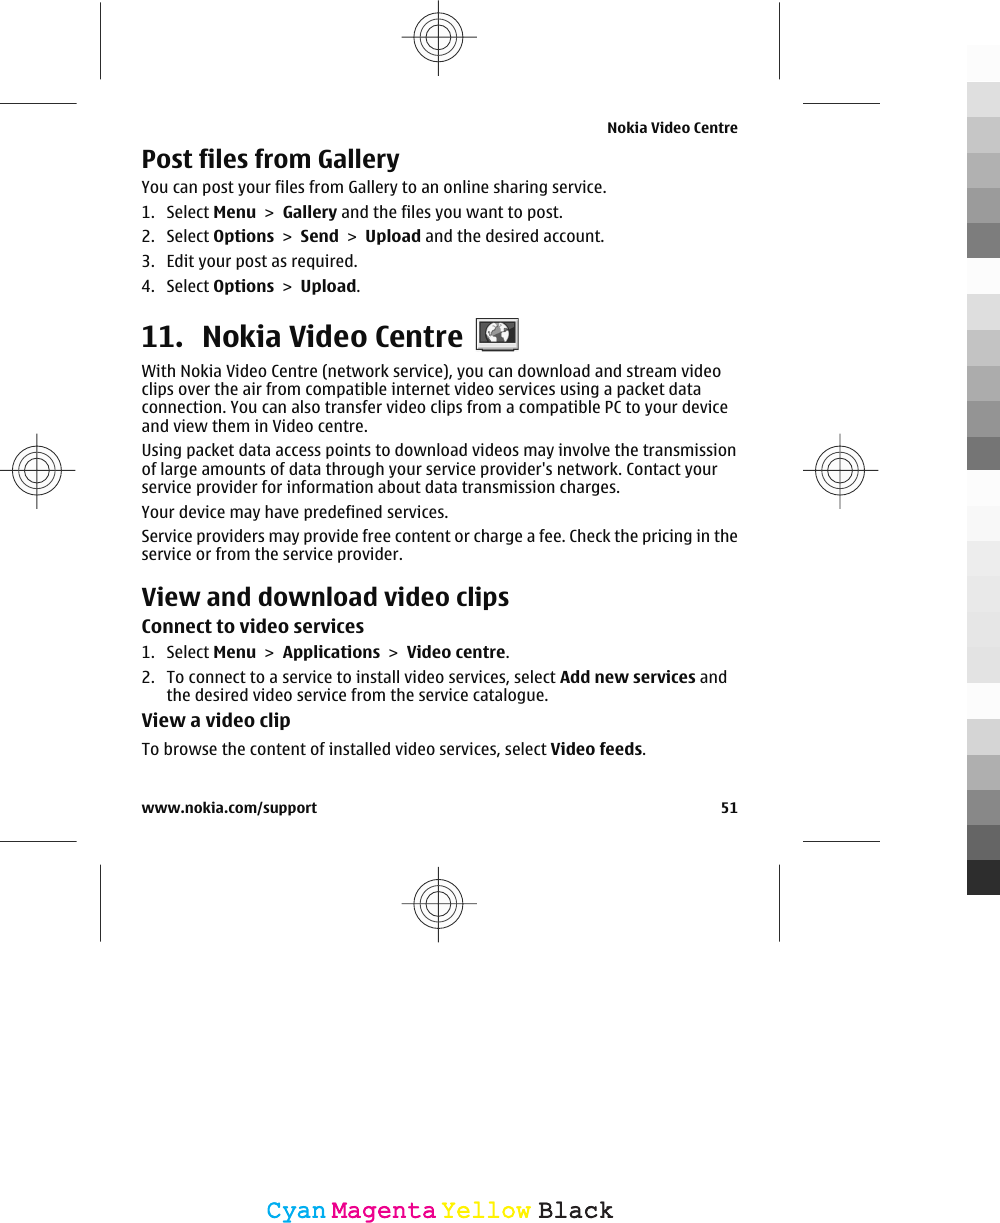 Post files from Gallery You can post your files from Gallery to an online sharing service.1. Select Menu &gt; Gallery and the files you want to post.2. Select Options &gt; Send &gt; Upload and the desired account.3. Edit your post as required.4. Select Options &gt; Upload.11. Nokia Video CentreWith Nokia Video Centre (network service), you can download and stream videoclips over the air from compatible internet video services using a packet dataconnection. You can also transfer video clips from a compatible PC to your deviceand view them in Video centre.Using packet data access points to download videos may involve the transmissionof large amounts of data through your service provider&apos;s network. Contact yourservice provider for information about data transmission charges.Your device may have predefined services.Service providers may provide free content or charge a fee. Check the pricing in theservice or from the service provider.View and download video clipsConnect to video services1. Select Menu &gt; Applications &gt; Video centre.2. To connect to a service to install video services, select Add new services andthe desired video service from the service catalogue.View a video clipTo browse the content of installed video services, select Video feeds.Nokia Video Centrewww.nokia.com/support 51CyanCyanMagentaMagentaYellowYellowBlackBlack